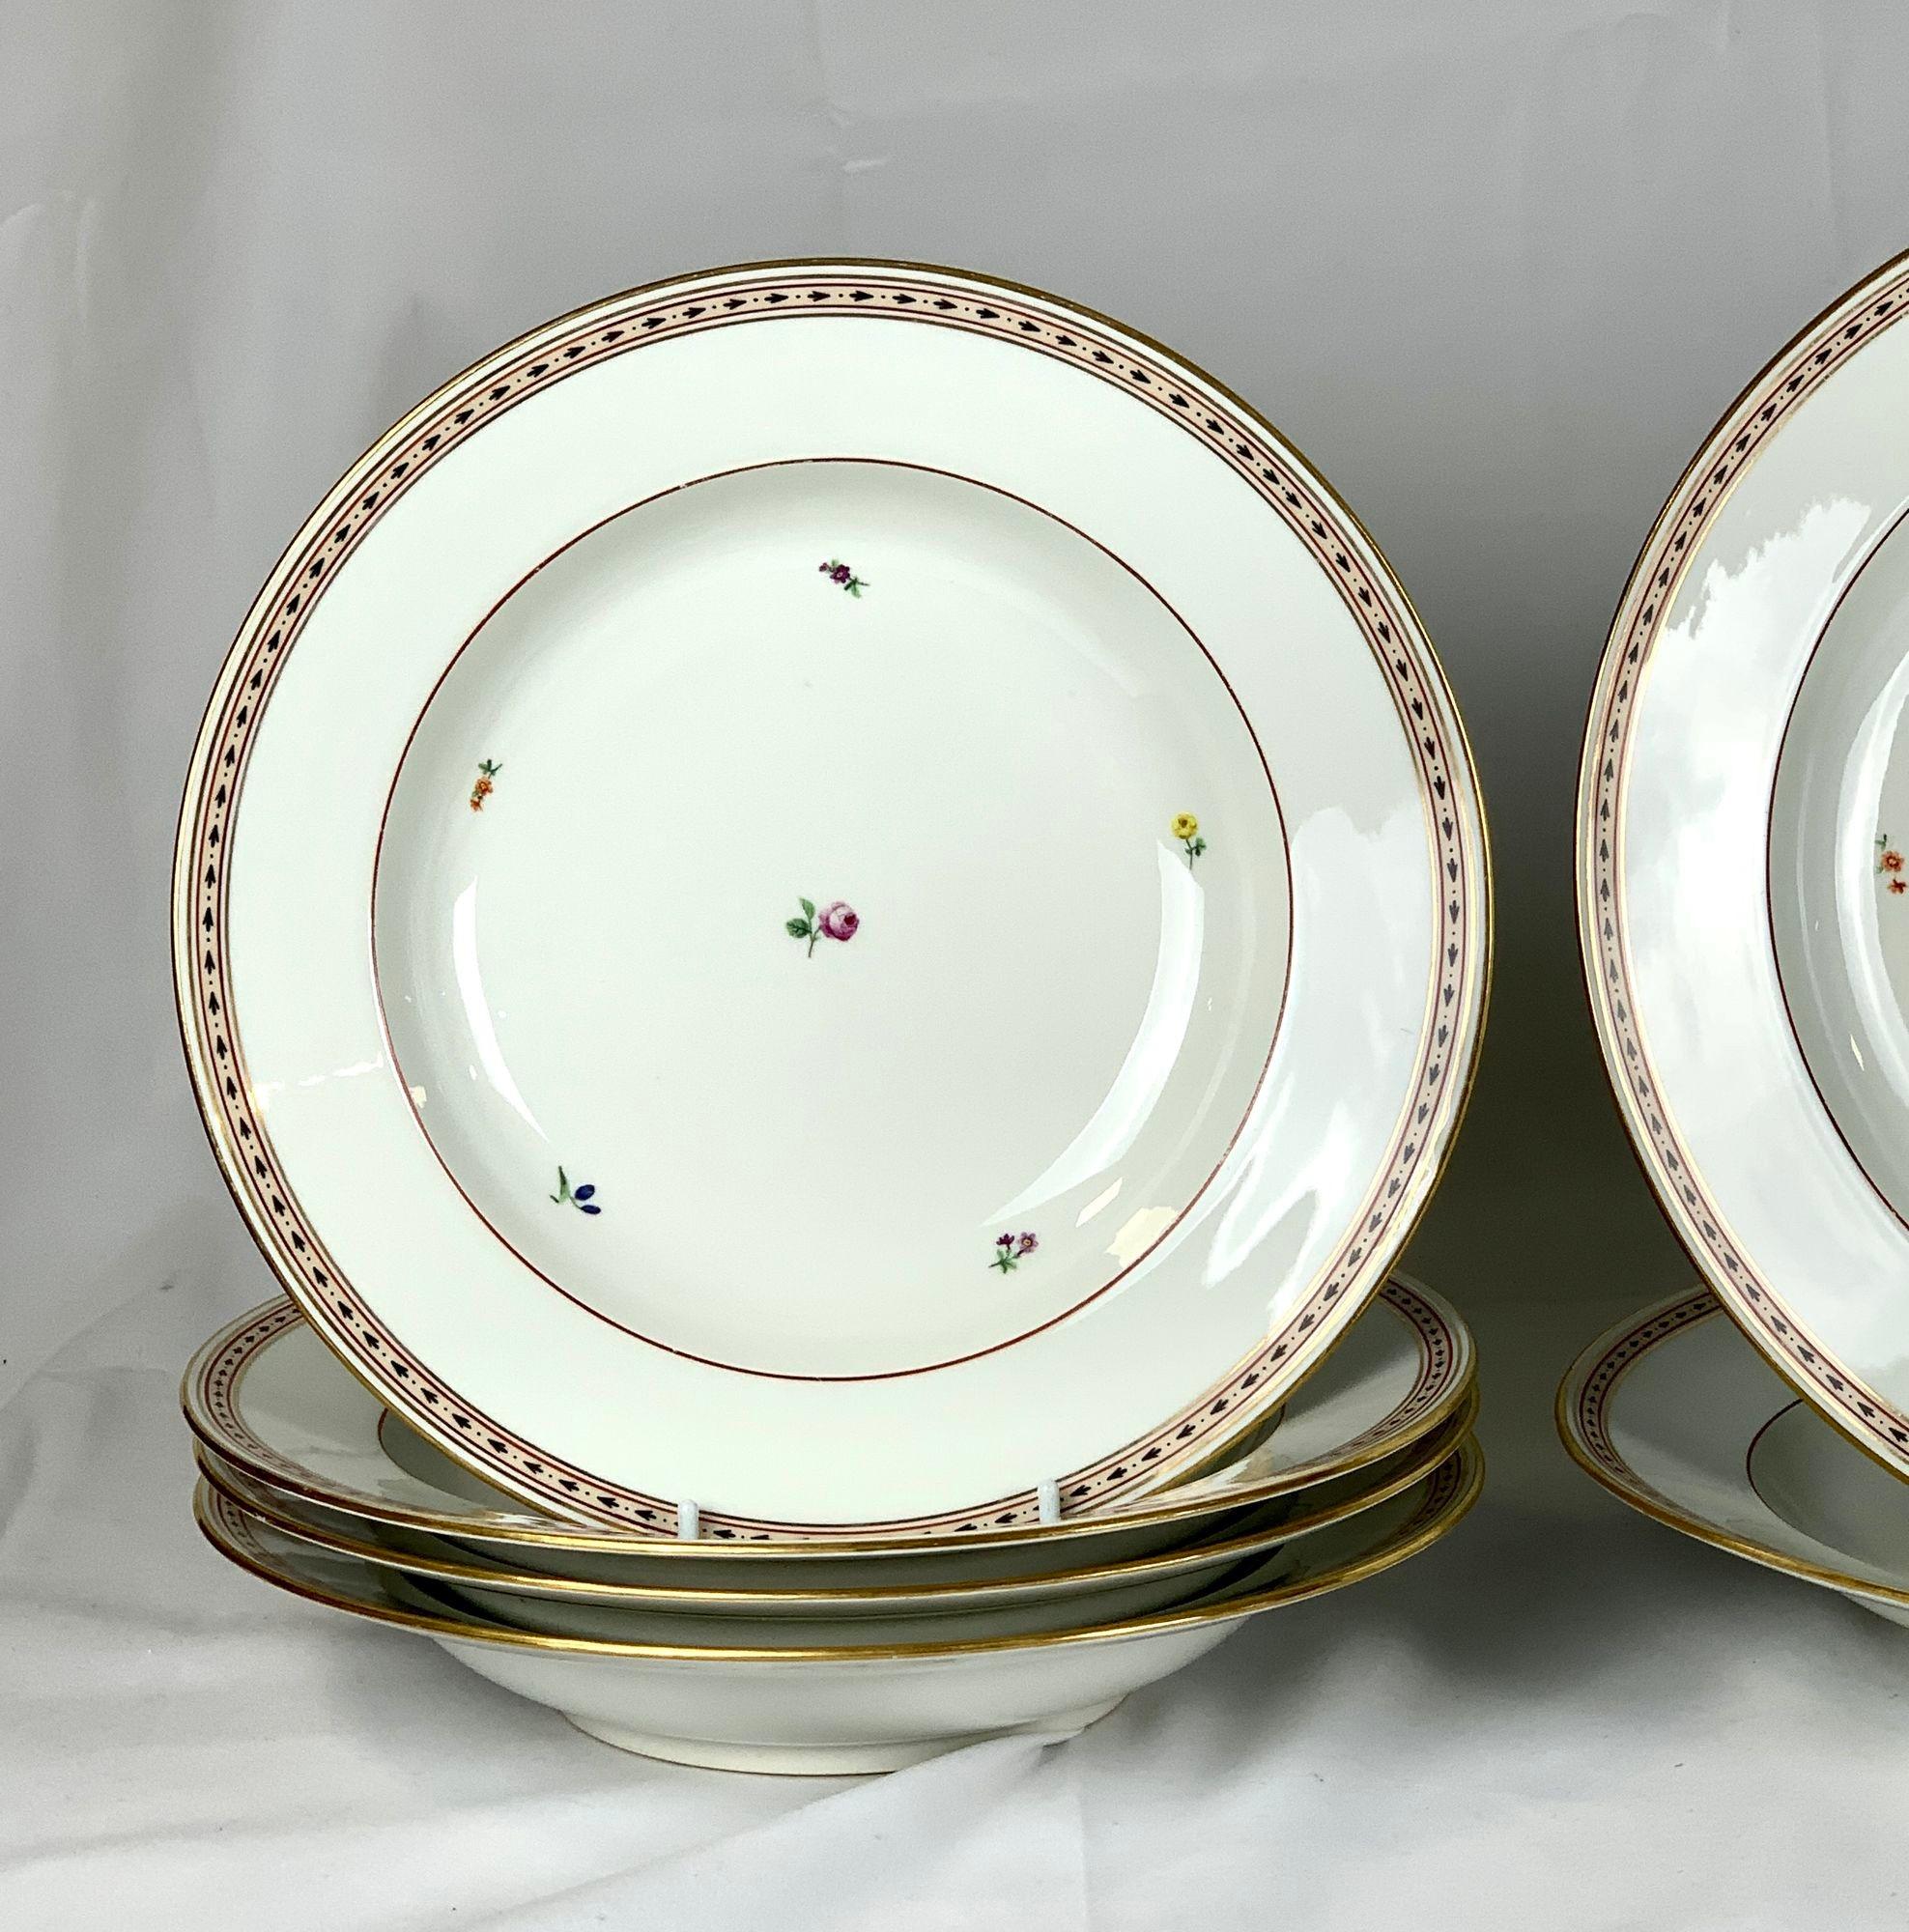 Hand-Painted Set of 4 Dinner 4 Soup Dishes 2 Chargers 18th Century Imperial Vienna Porcelain For Sale